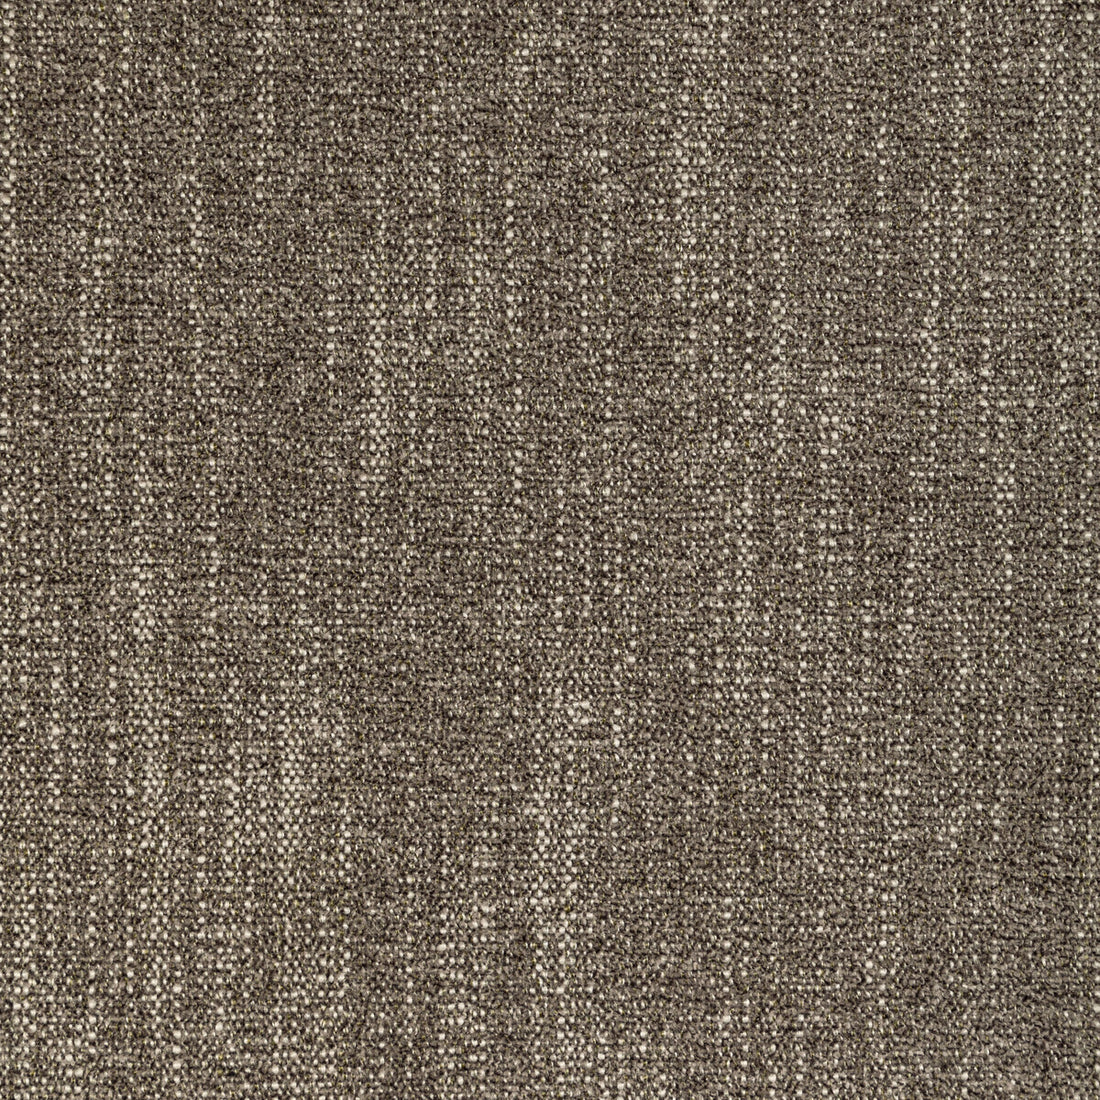 Marnie fabric in truffle color - pattern 36747.6.0 - by Kravet Contract in the Refined Textures Performance Crypton collection